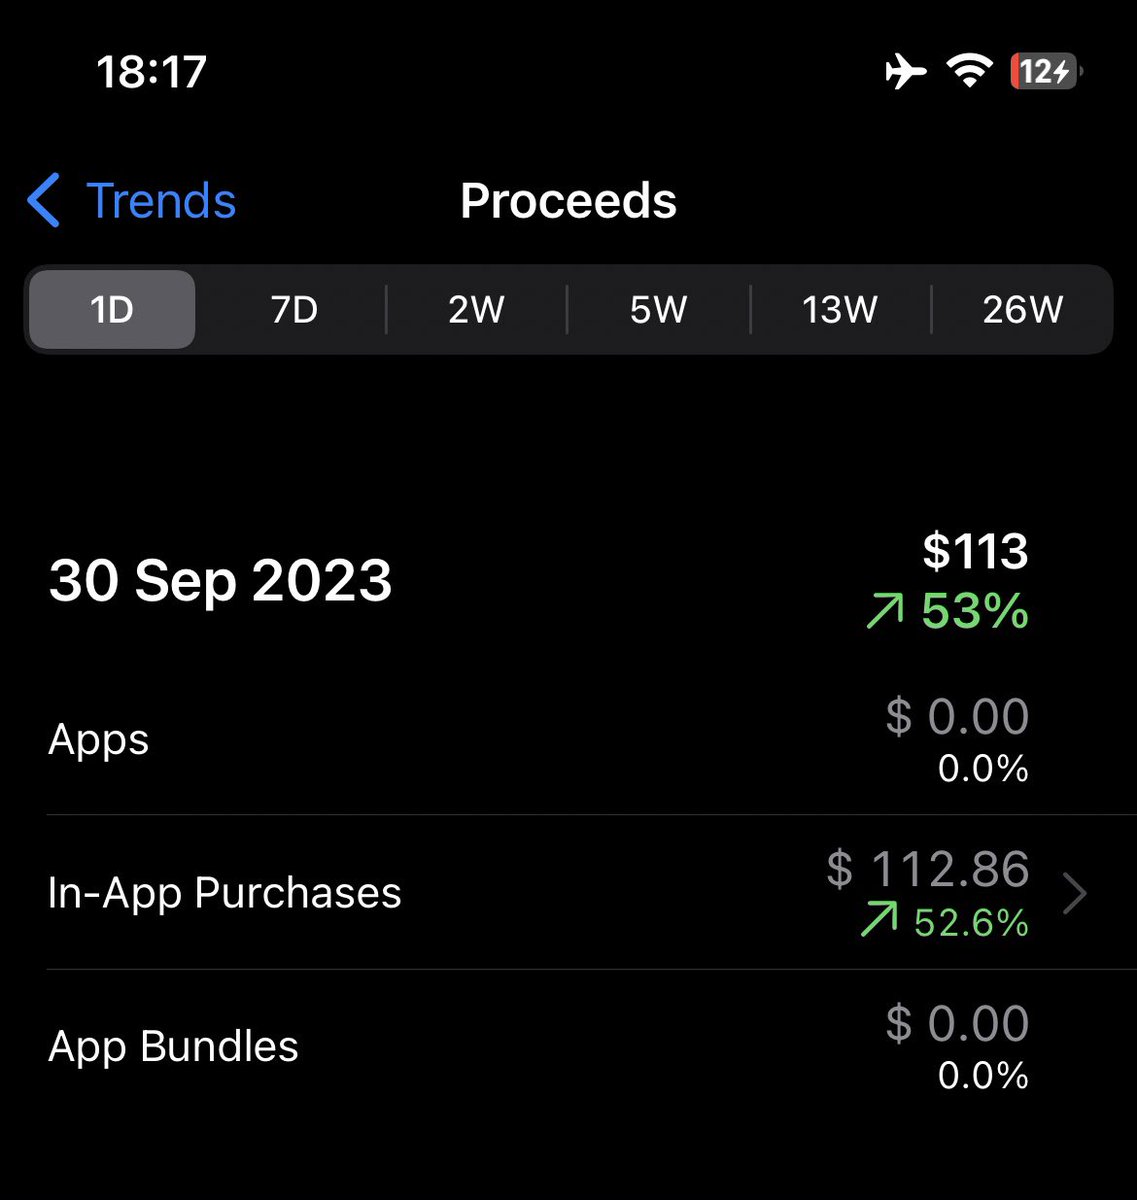 Just hit a milestone! 🎉 Made over $150 in sales with my 2 apps on the App Store, netting 100+ USD in proceeds in just a day! I hope this is just the beginning. 📲 #AppDeveloper #AppStore #iosdeveloper